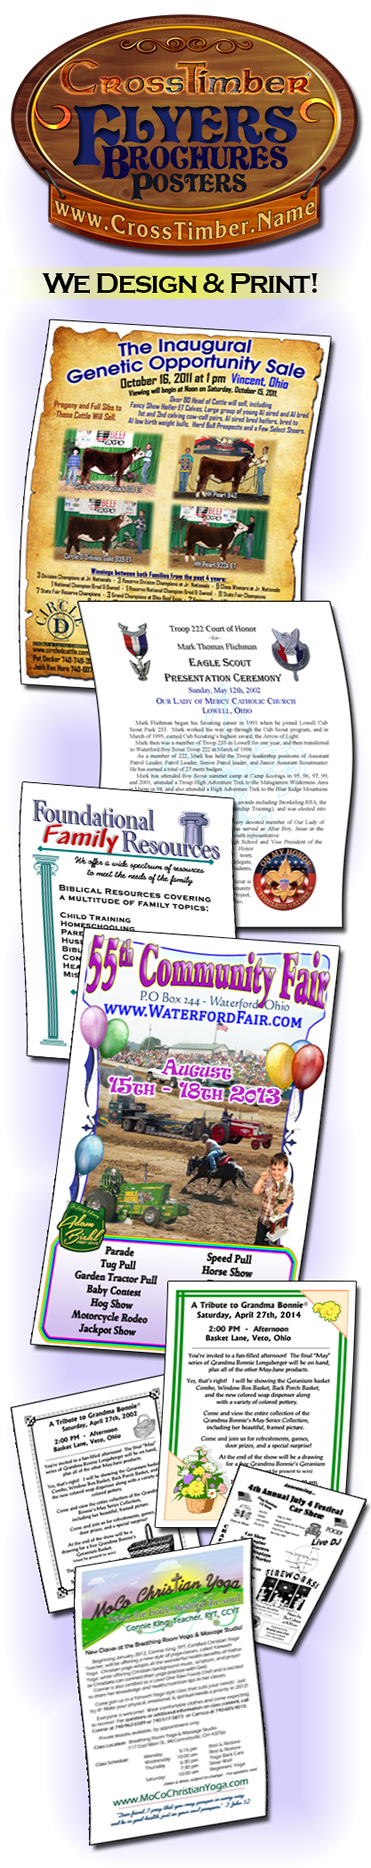 Flyers, designed and printed by CrossTimber 740-984-2583